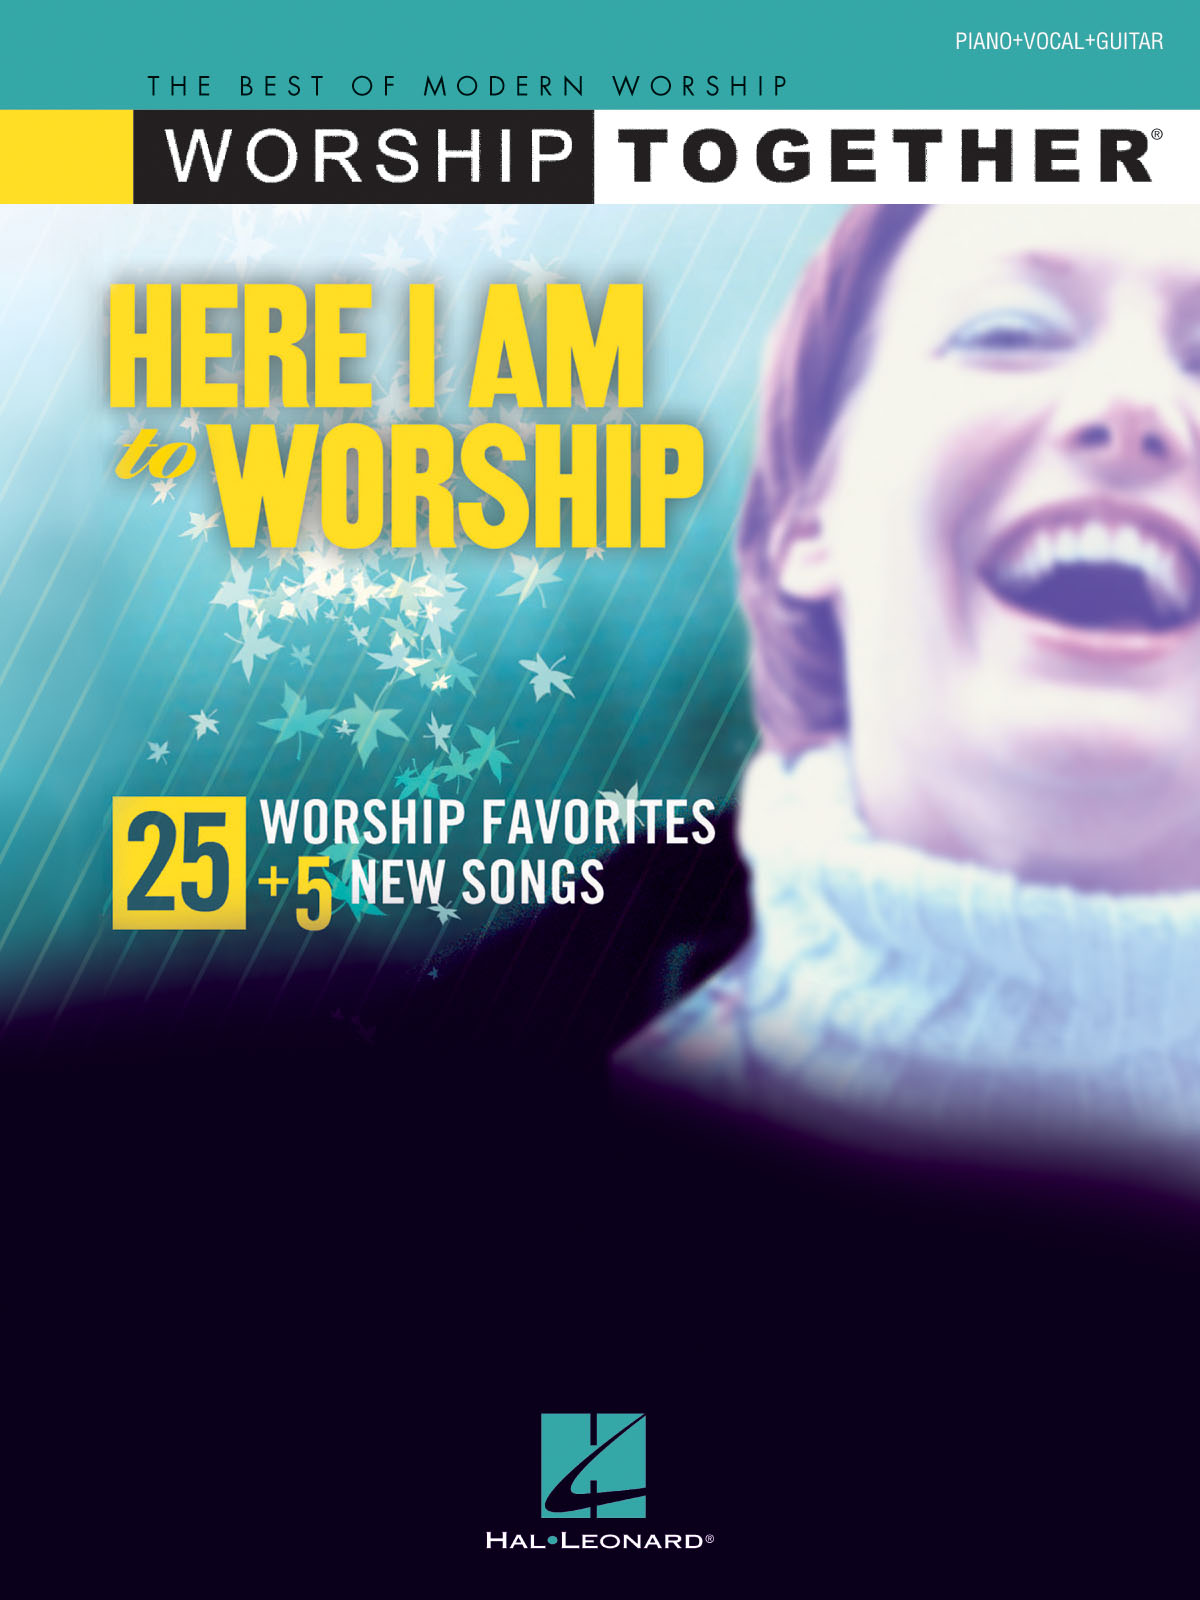 Here I Am to Worship (25 Worship Favorites + 5 New Songs)